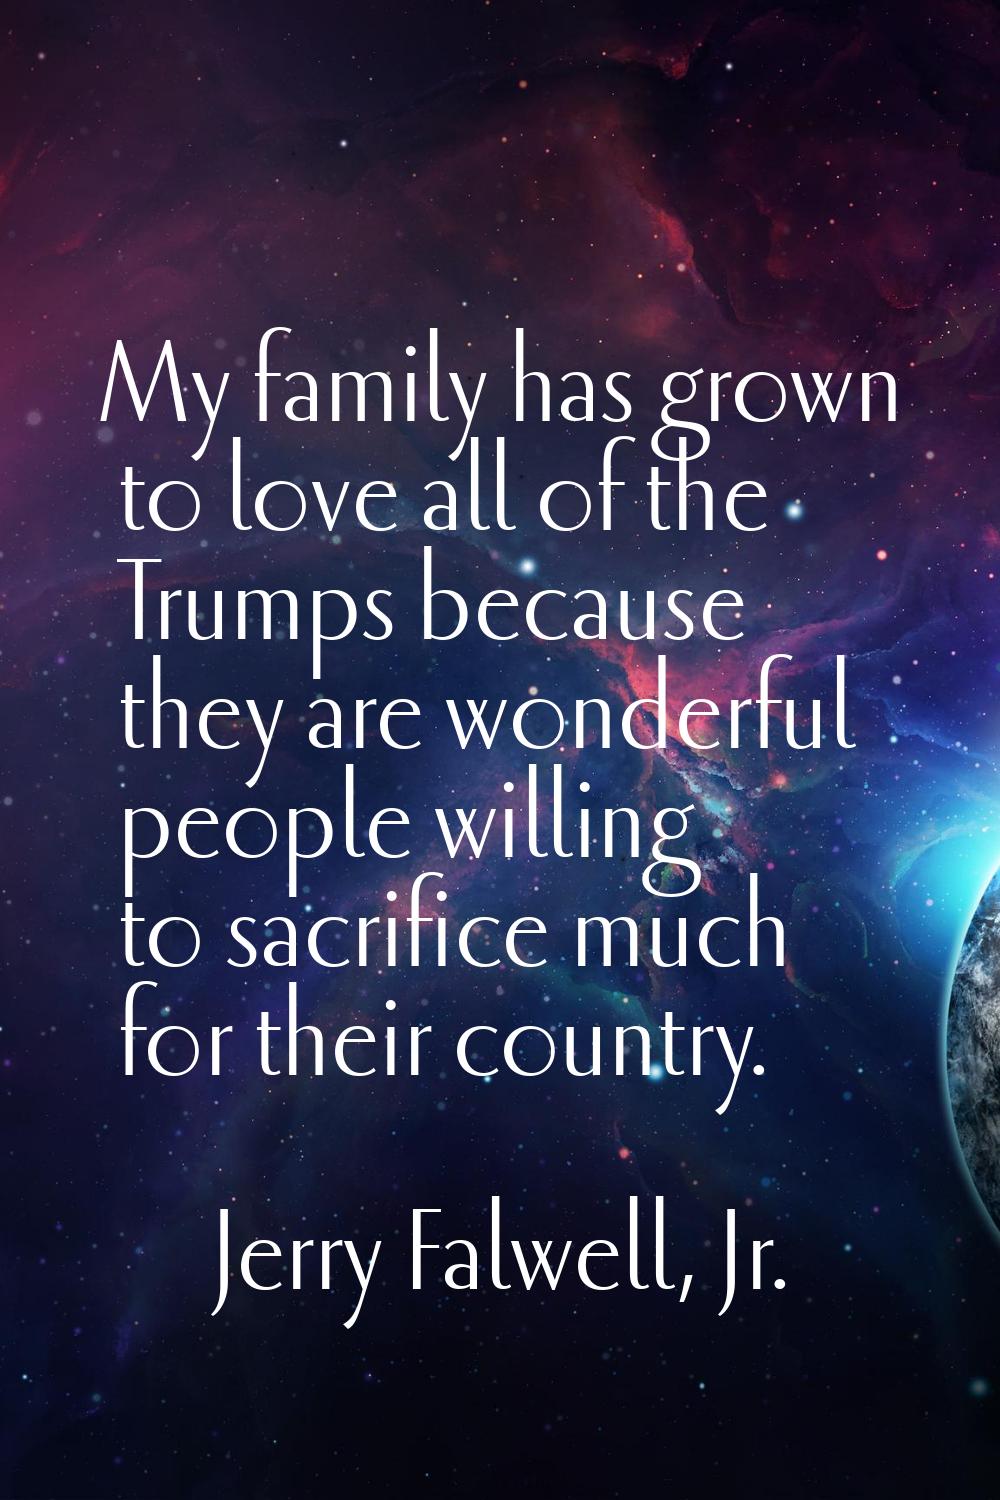 My family has grown to love all of the Trumps because they are wonderful people willing to sacrific